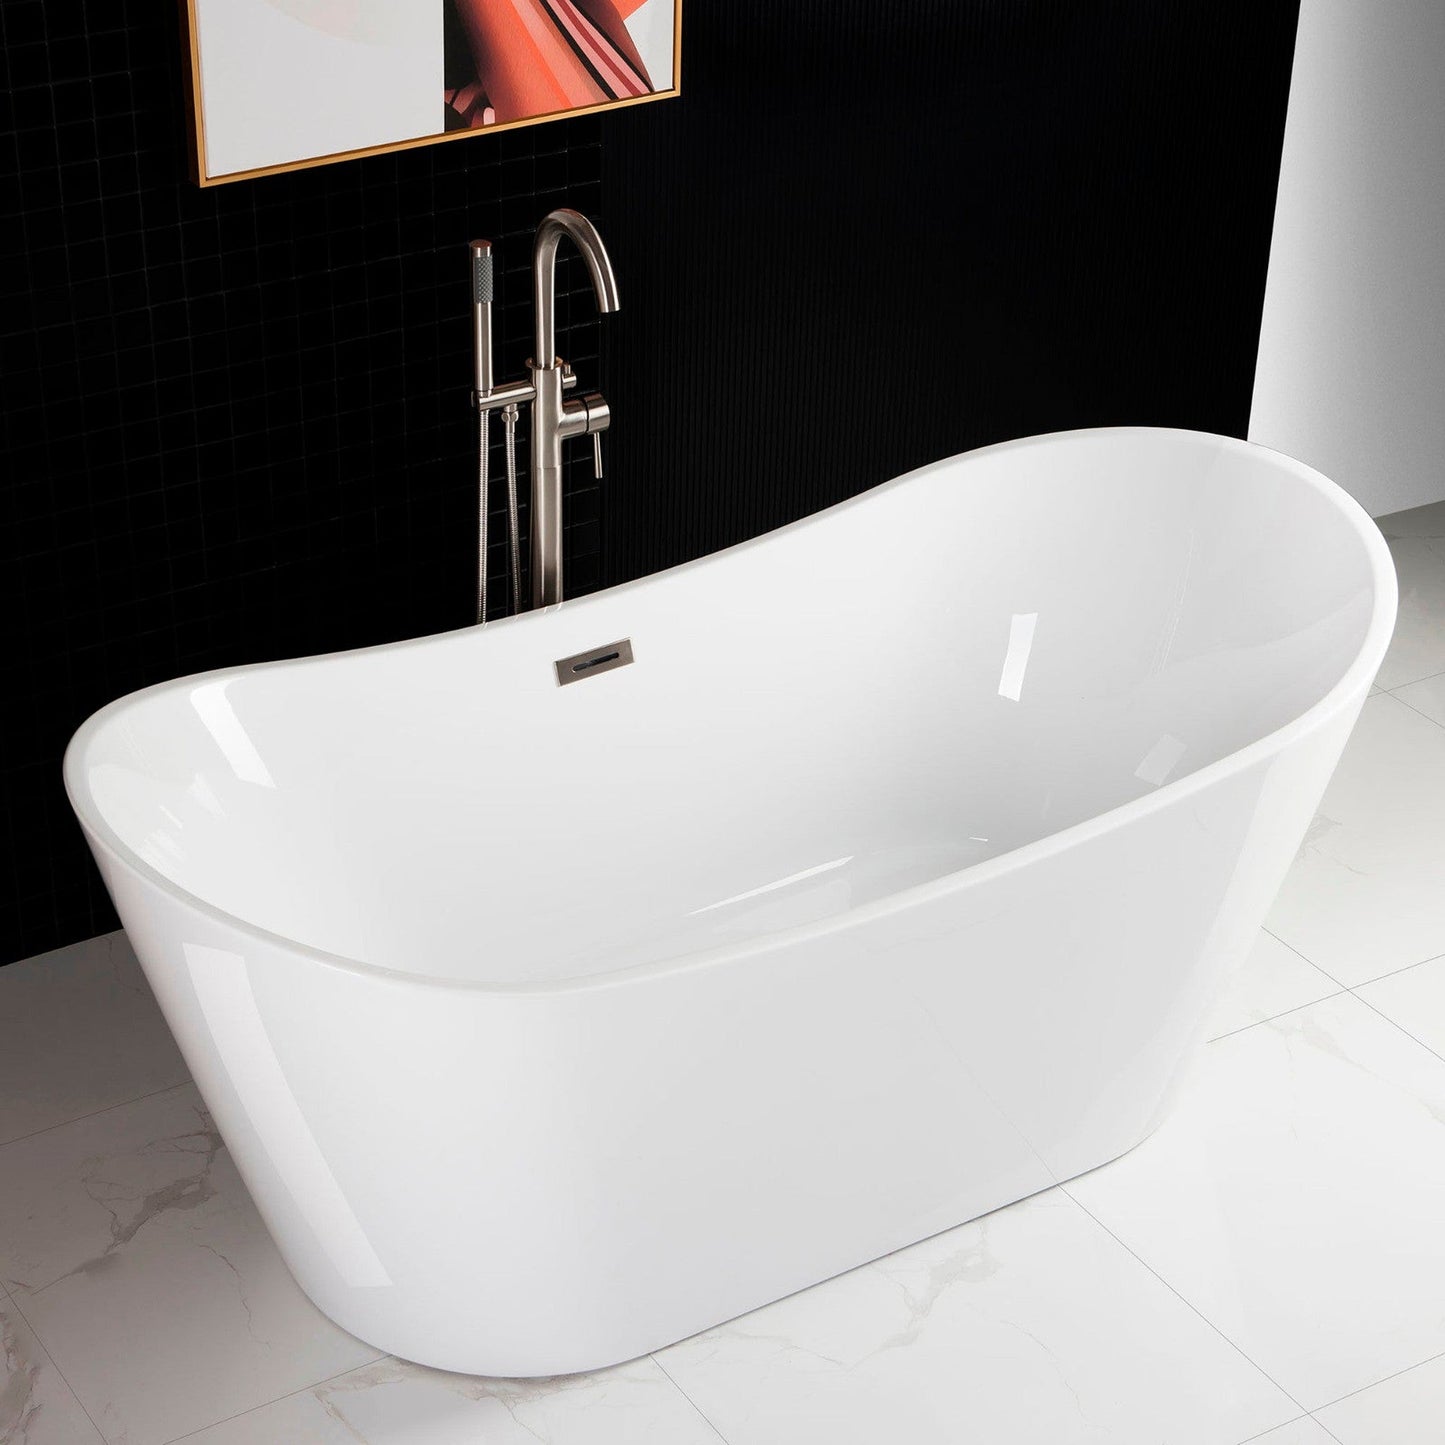 WoodBridge B0010 67" White Acrylic Freestanding Contemporary Soaking Bathtub With Chrome Drain, Overflow, F0024CHVT Tub Filler and Caddy Tray